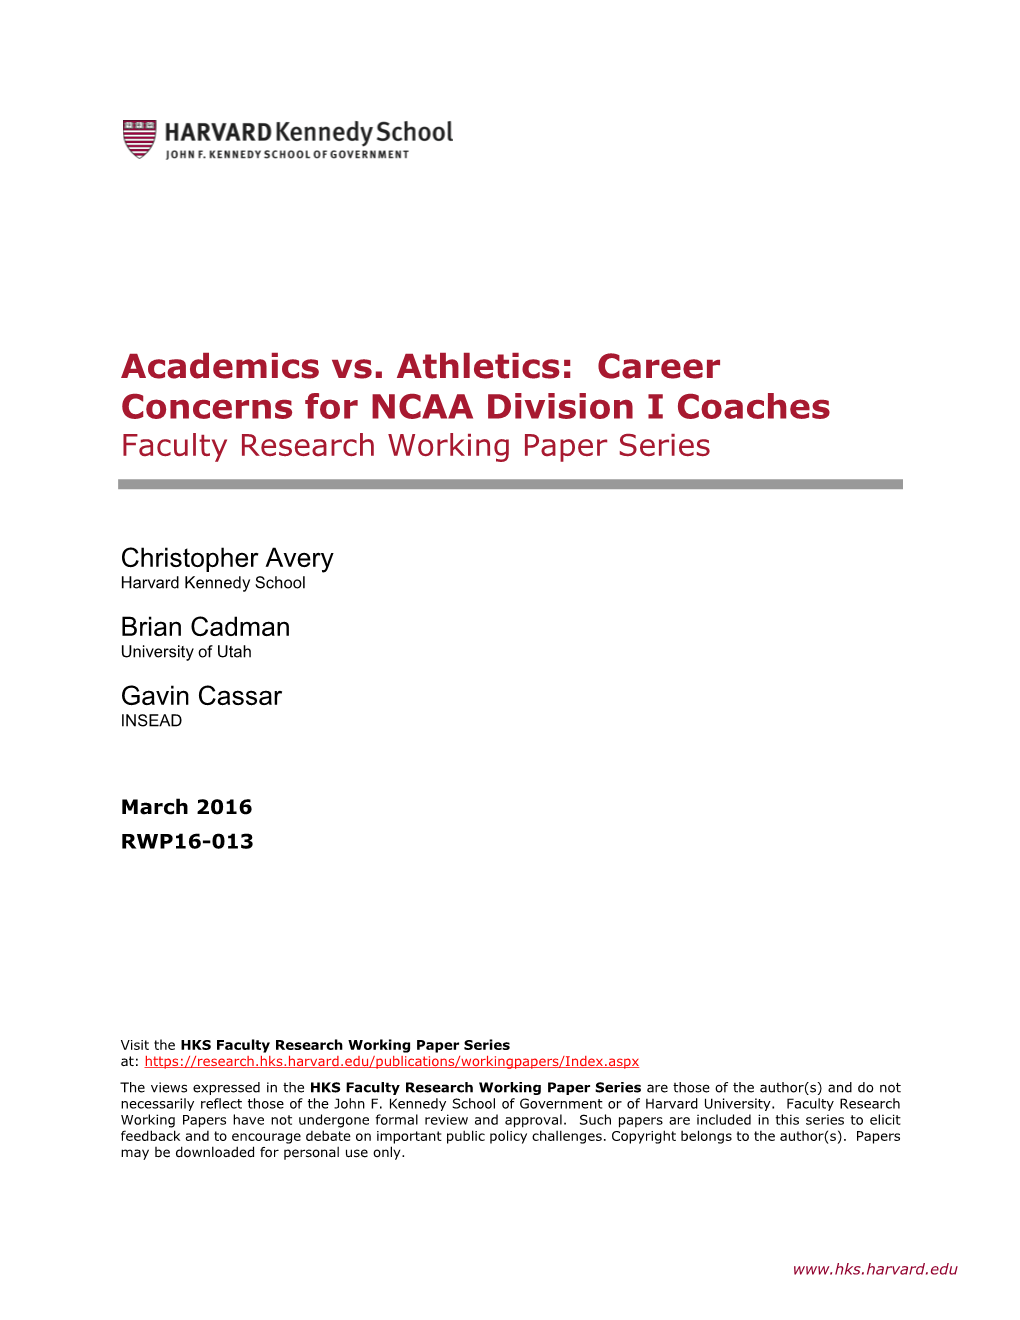 Academics Vs. Athletics: Career Concerns for NCAA Division I Coaches Faculty Research Working Paper Series